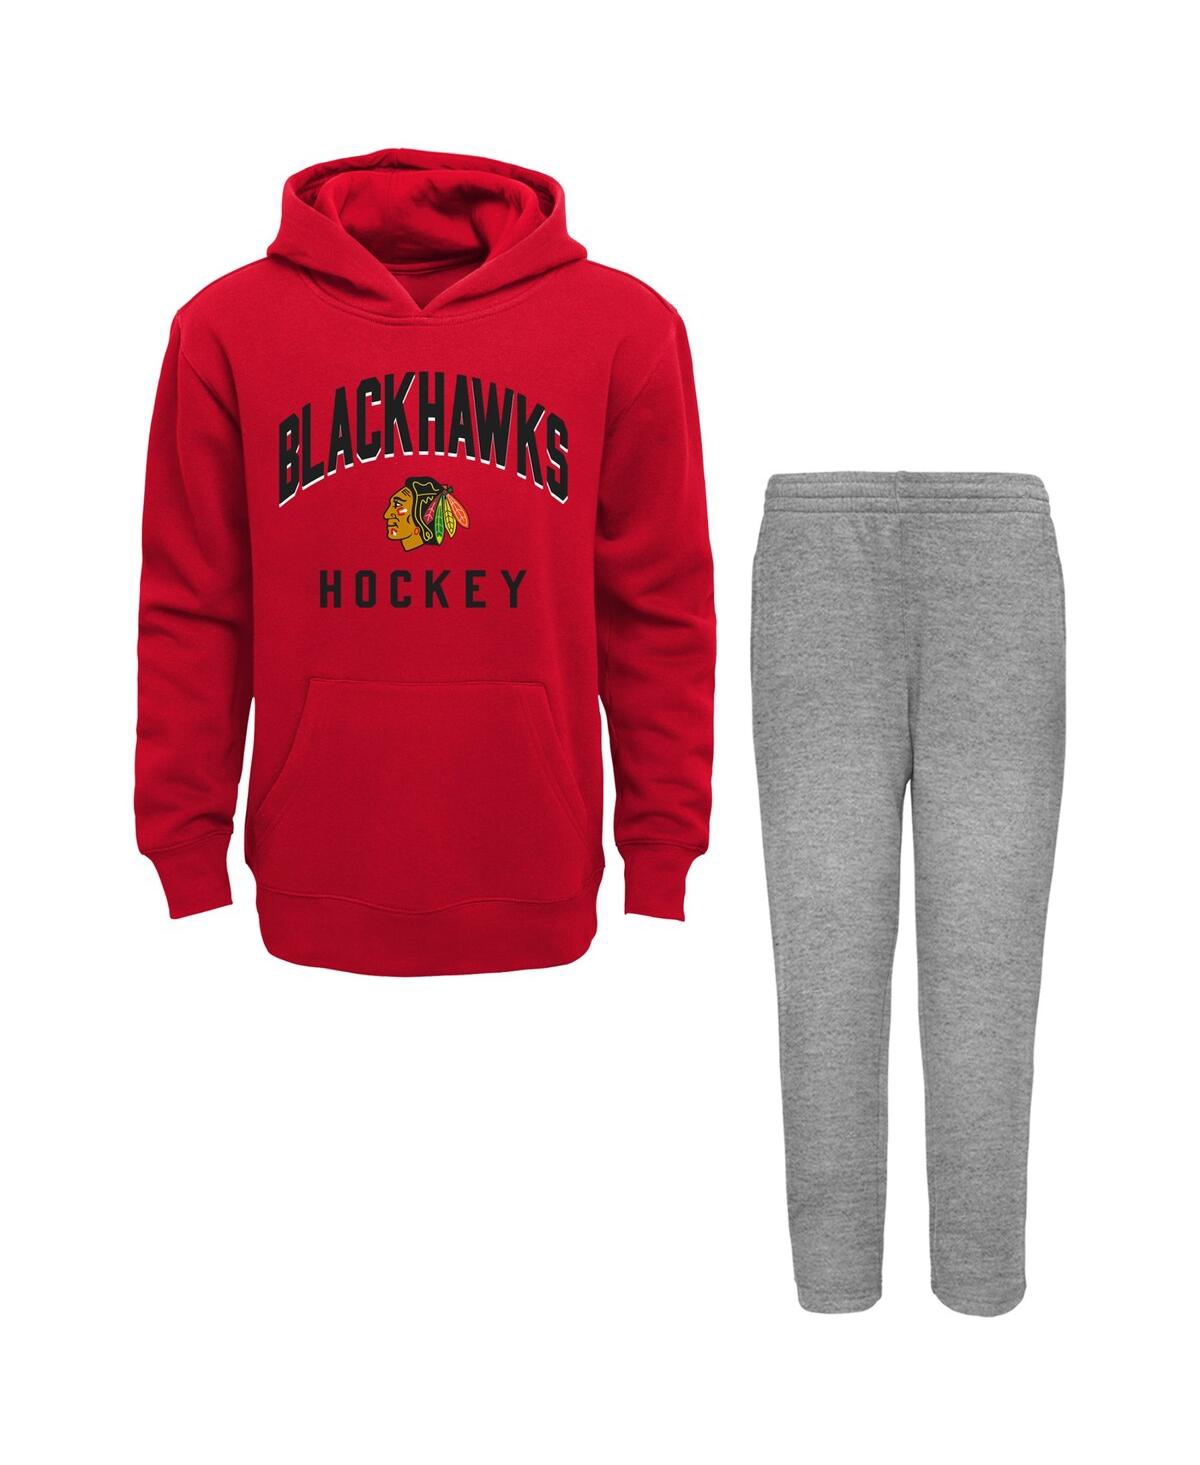 Outerstuff Babies' Toddler Boys Red, Heather Gray Chicago Blackhawks Play By Play Pullover Hoodie And Pants Set In Red,heather Gray